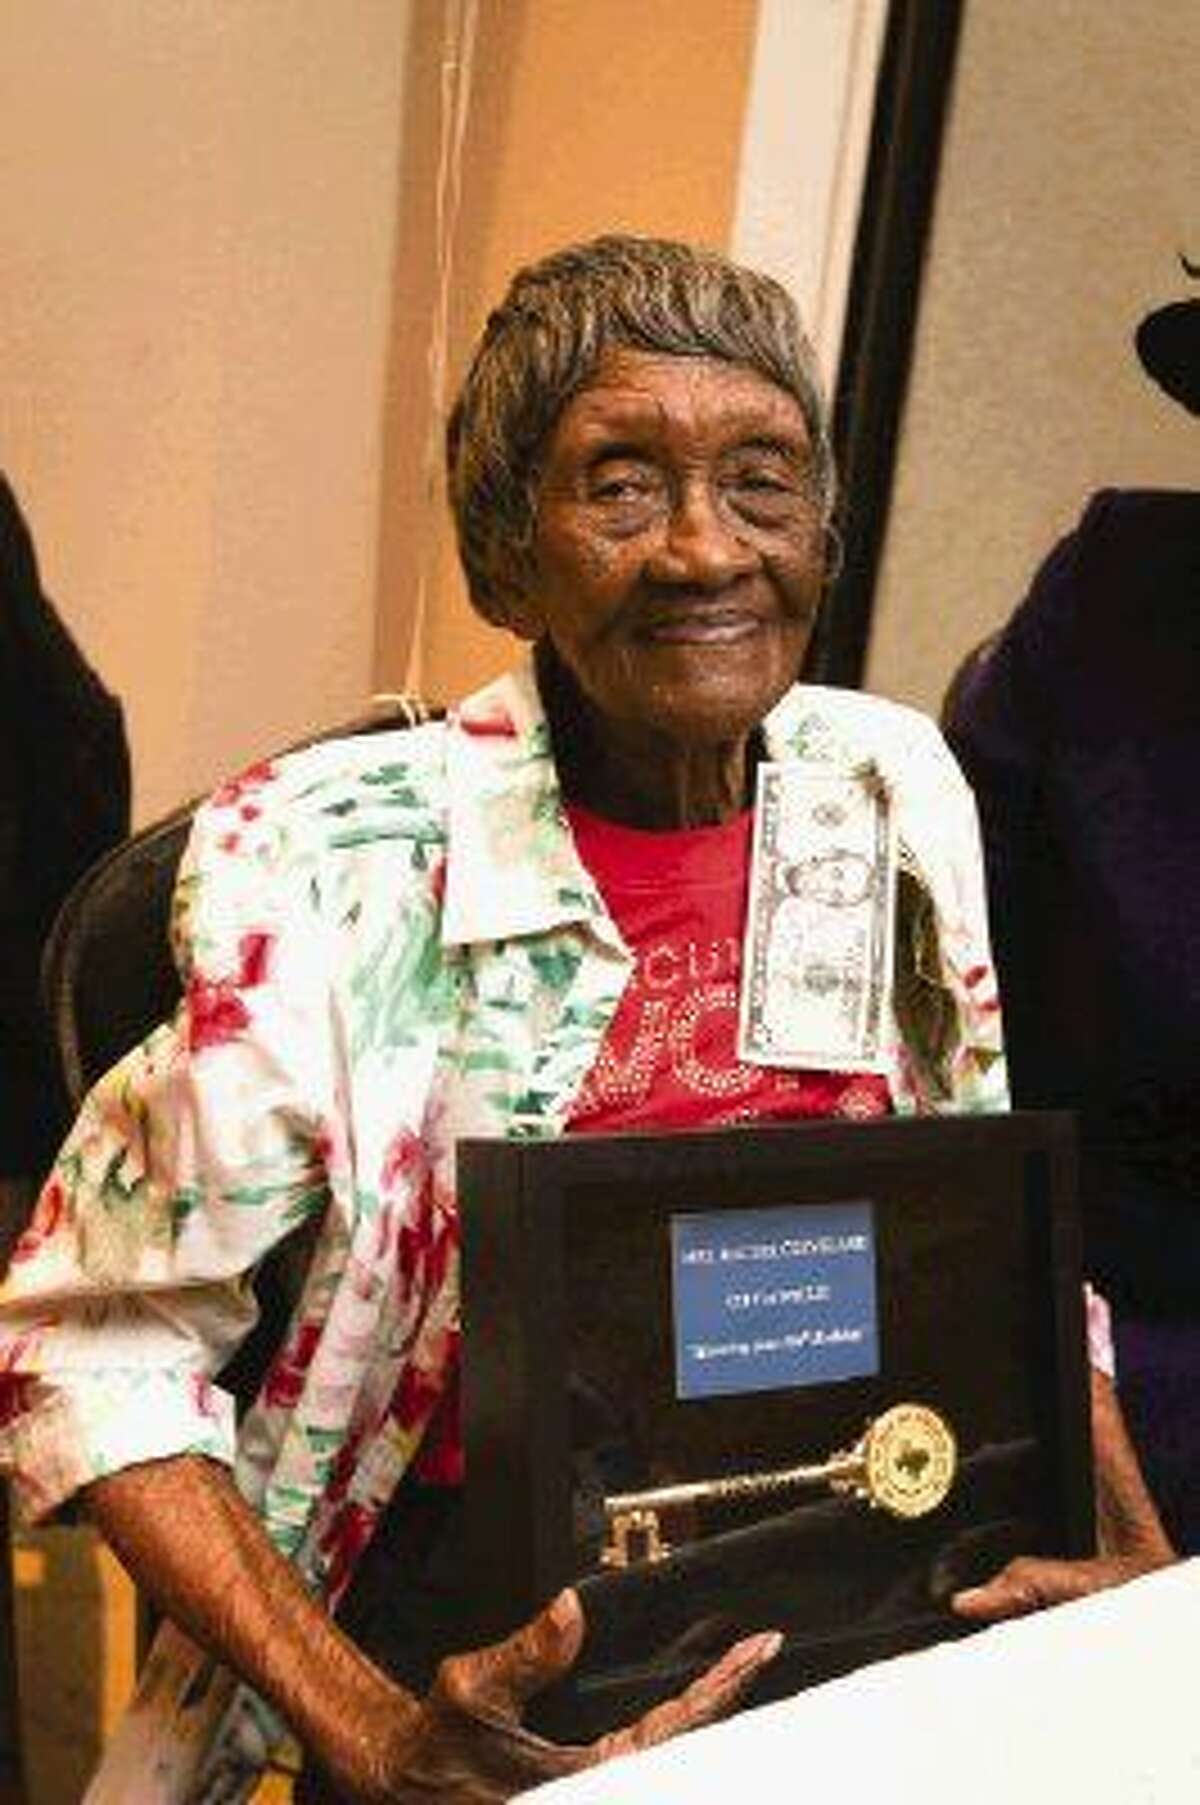 Willis resident Rachel Cleveland celebrates turning 100 years old by receiving a key to the city from Mayor Leonard Reed on Sunday at the North Montgomery Community Center.